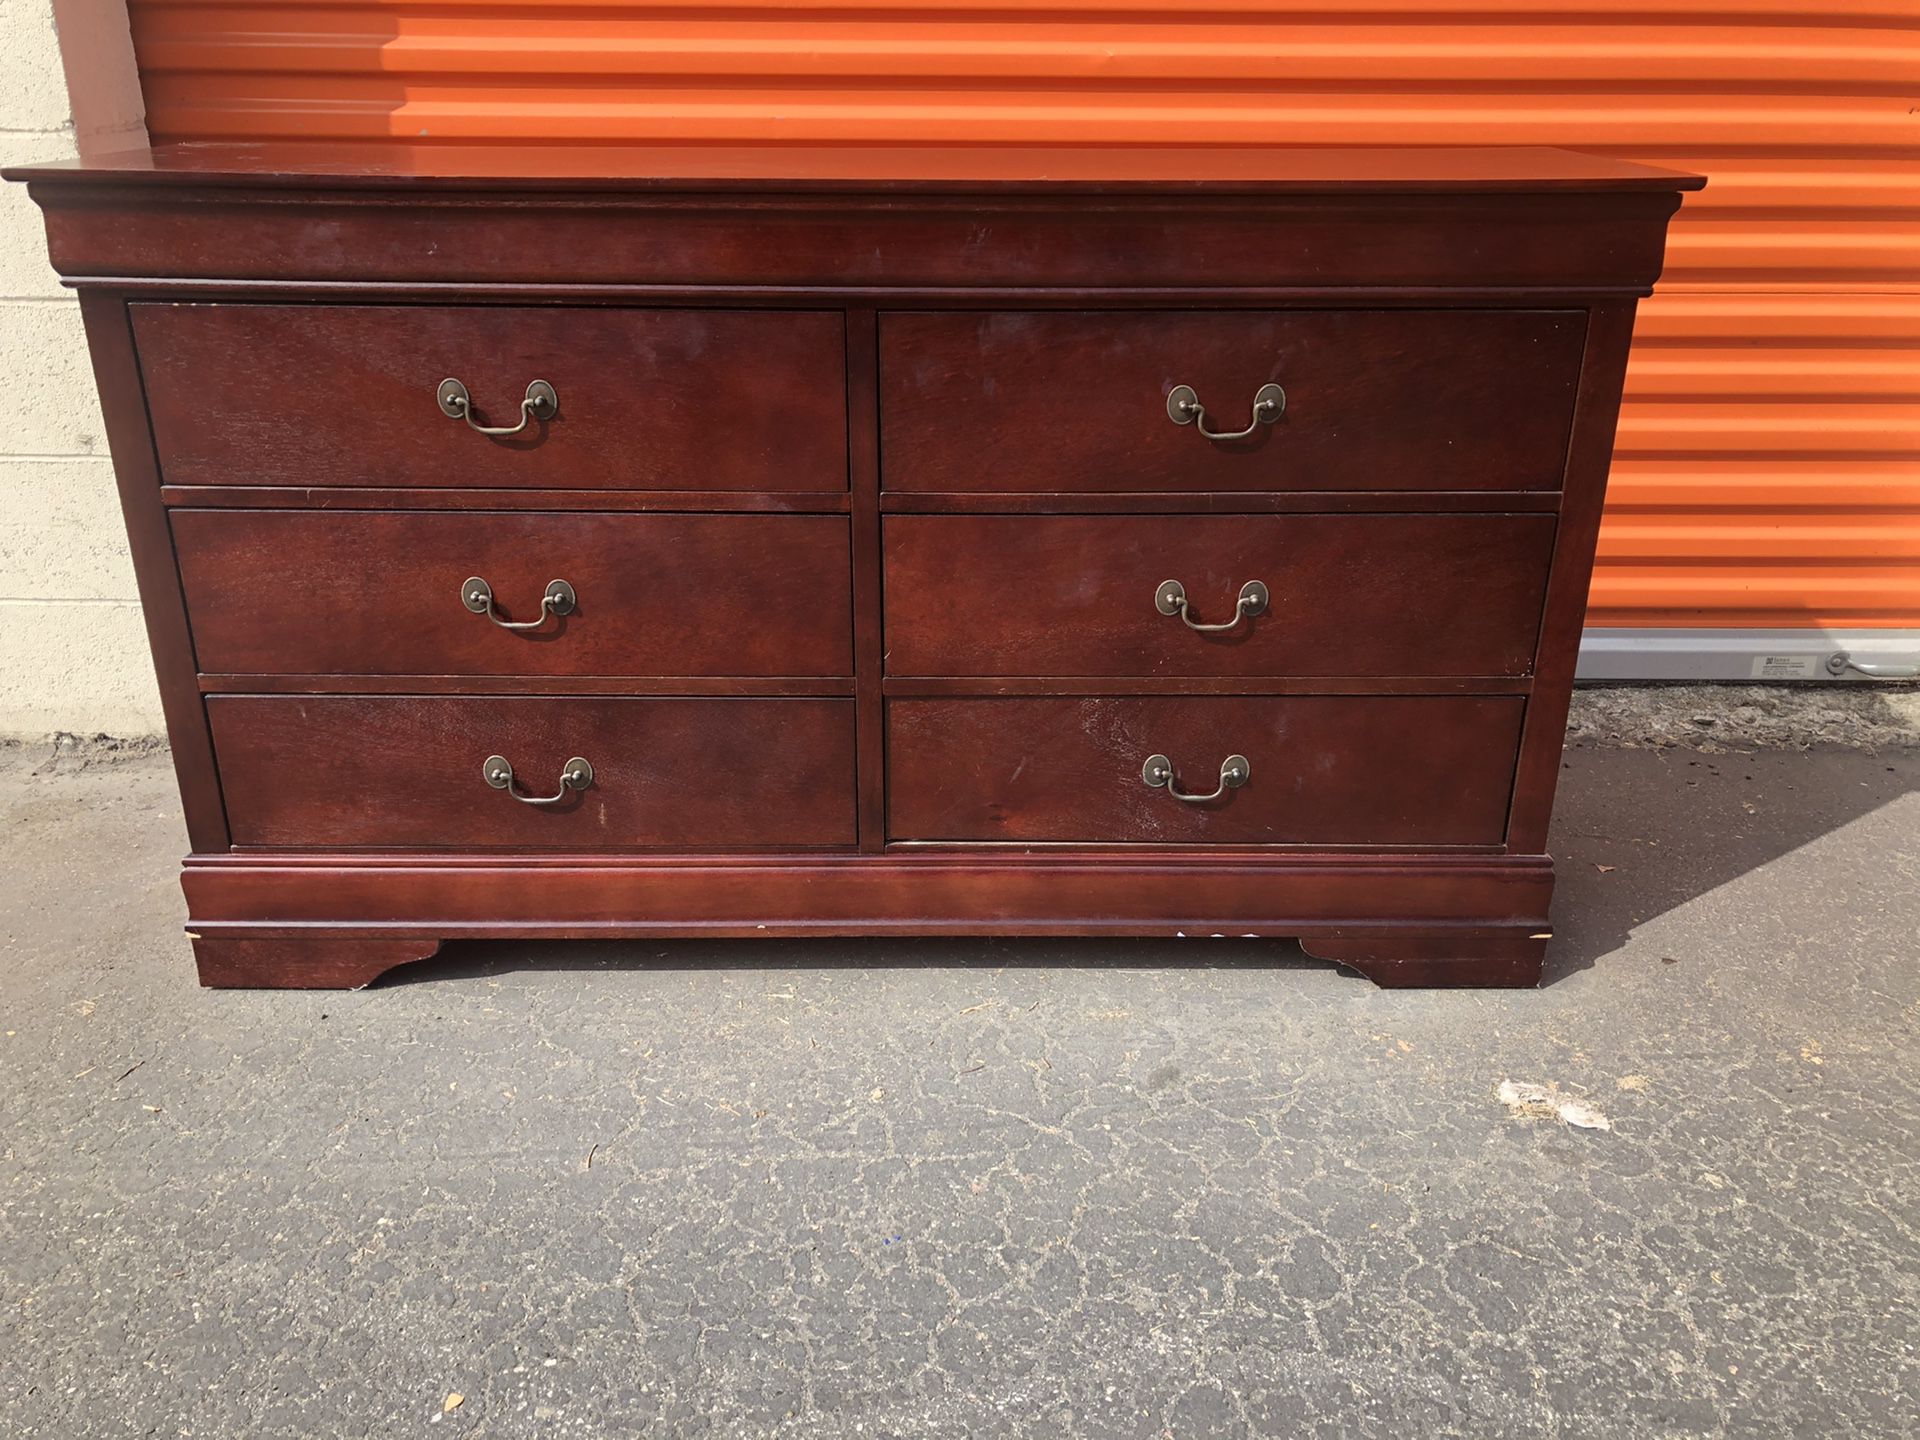 Red wooden dresser with mirror included along with matching night stand